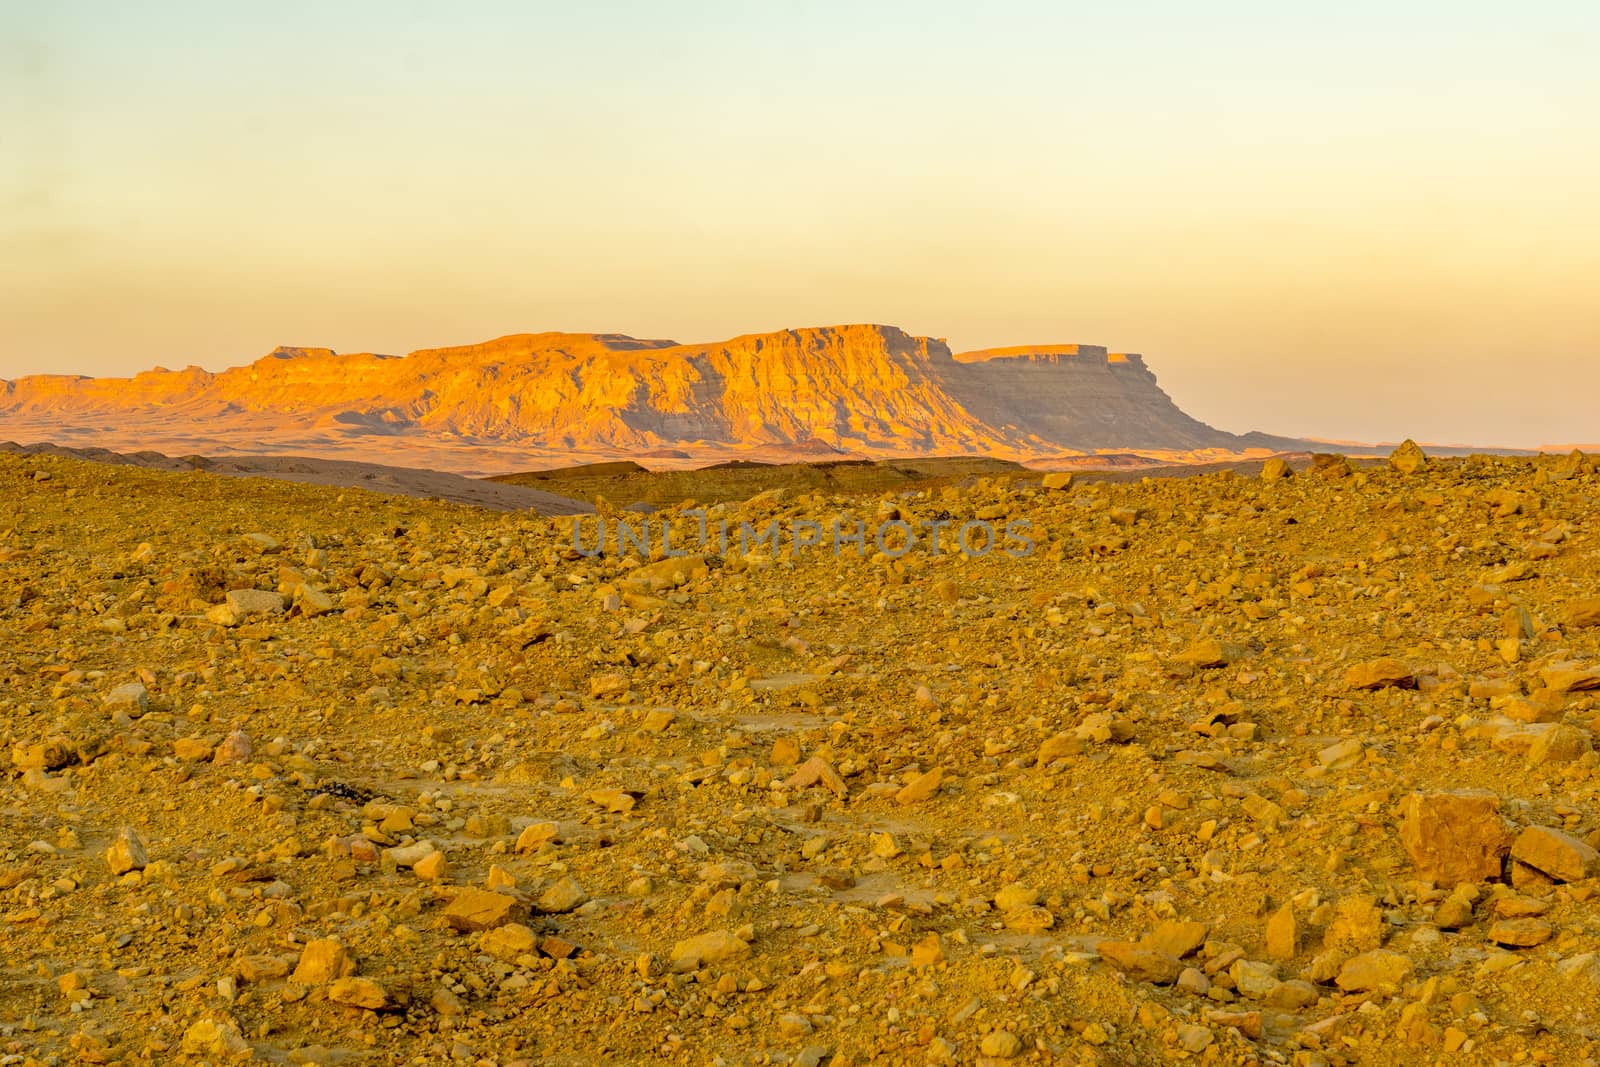 Sunset view towards Mount Ardon, in Makhtesh (crater) Ramon by RnDmS